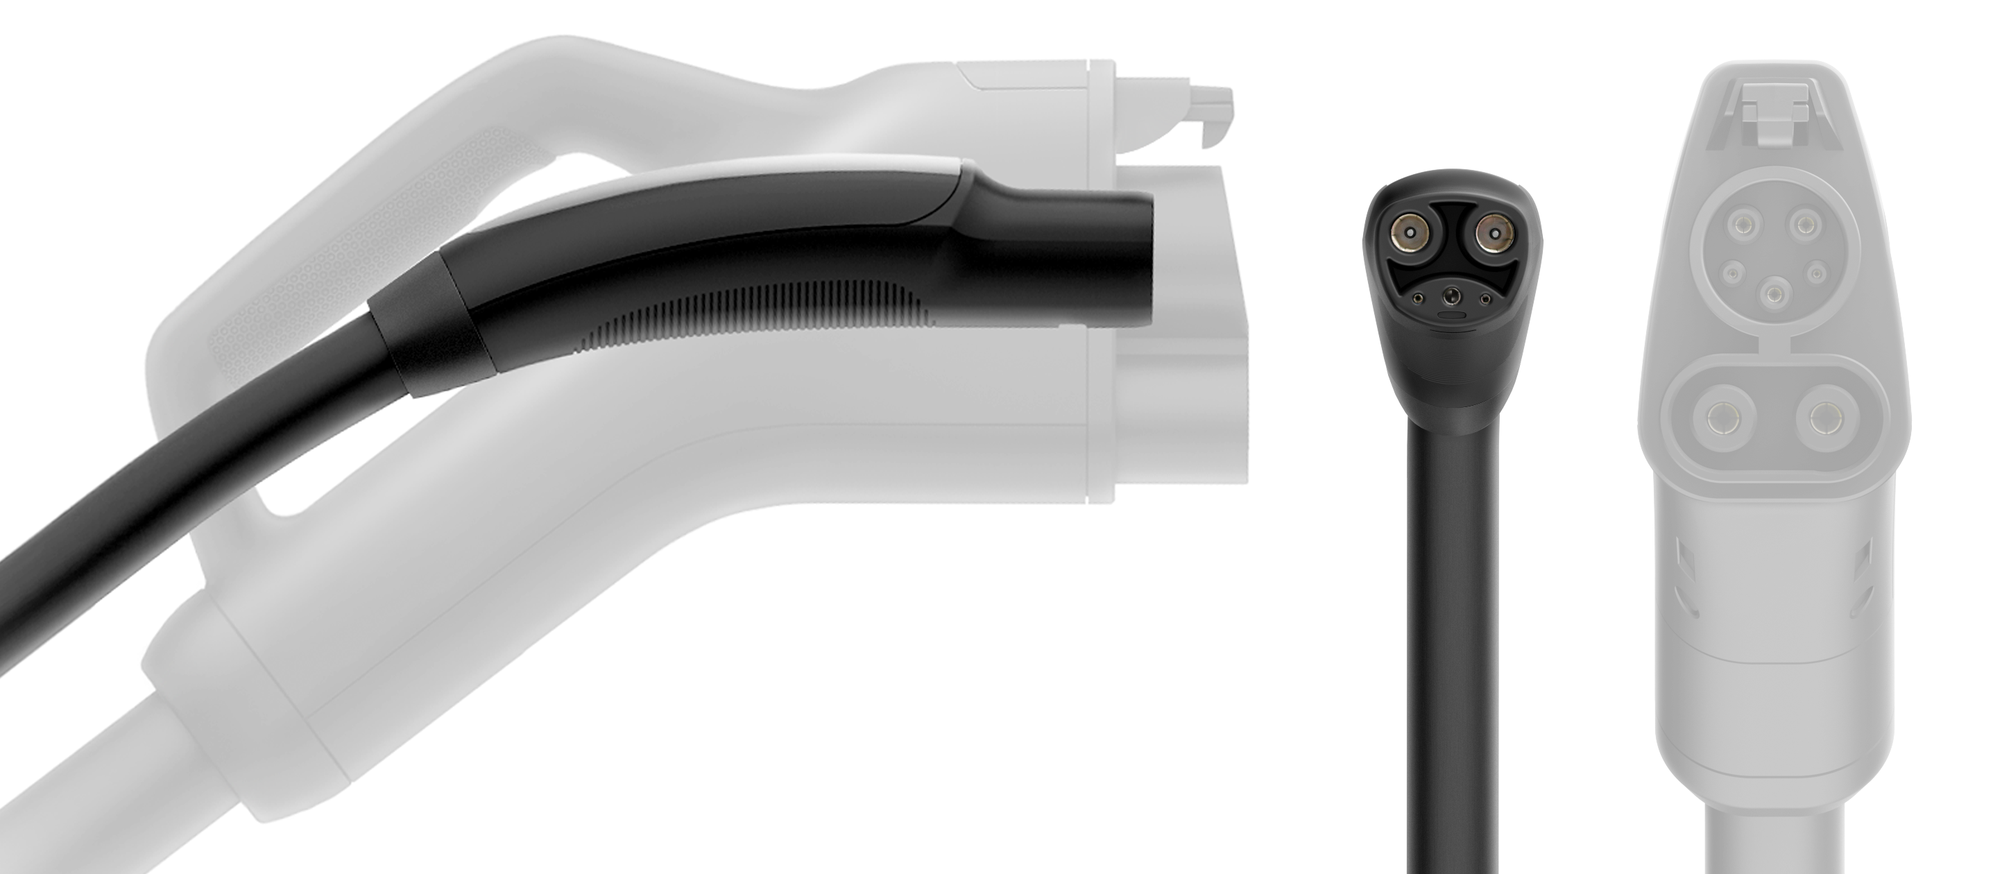 Tesla opens EV charging connector design to the world